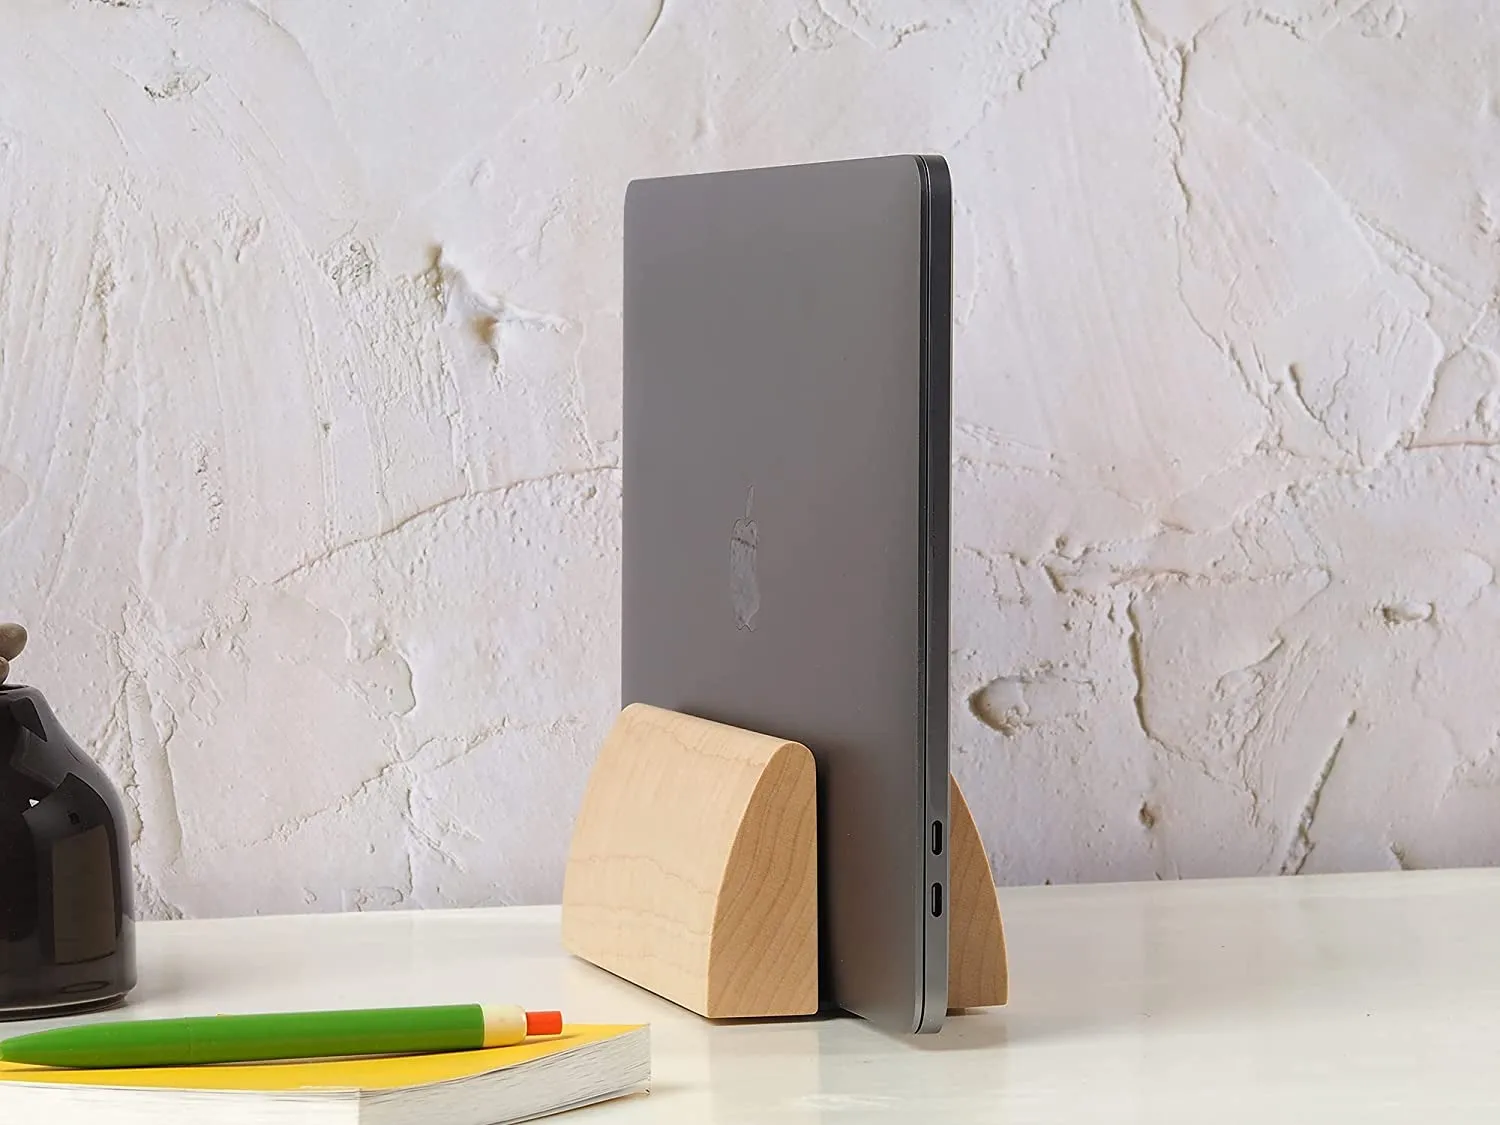 Bamboo Tablet Dock (iPad Stand)  Transform Your Desktop and Workspace –  Great Useful Stuff